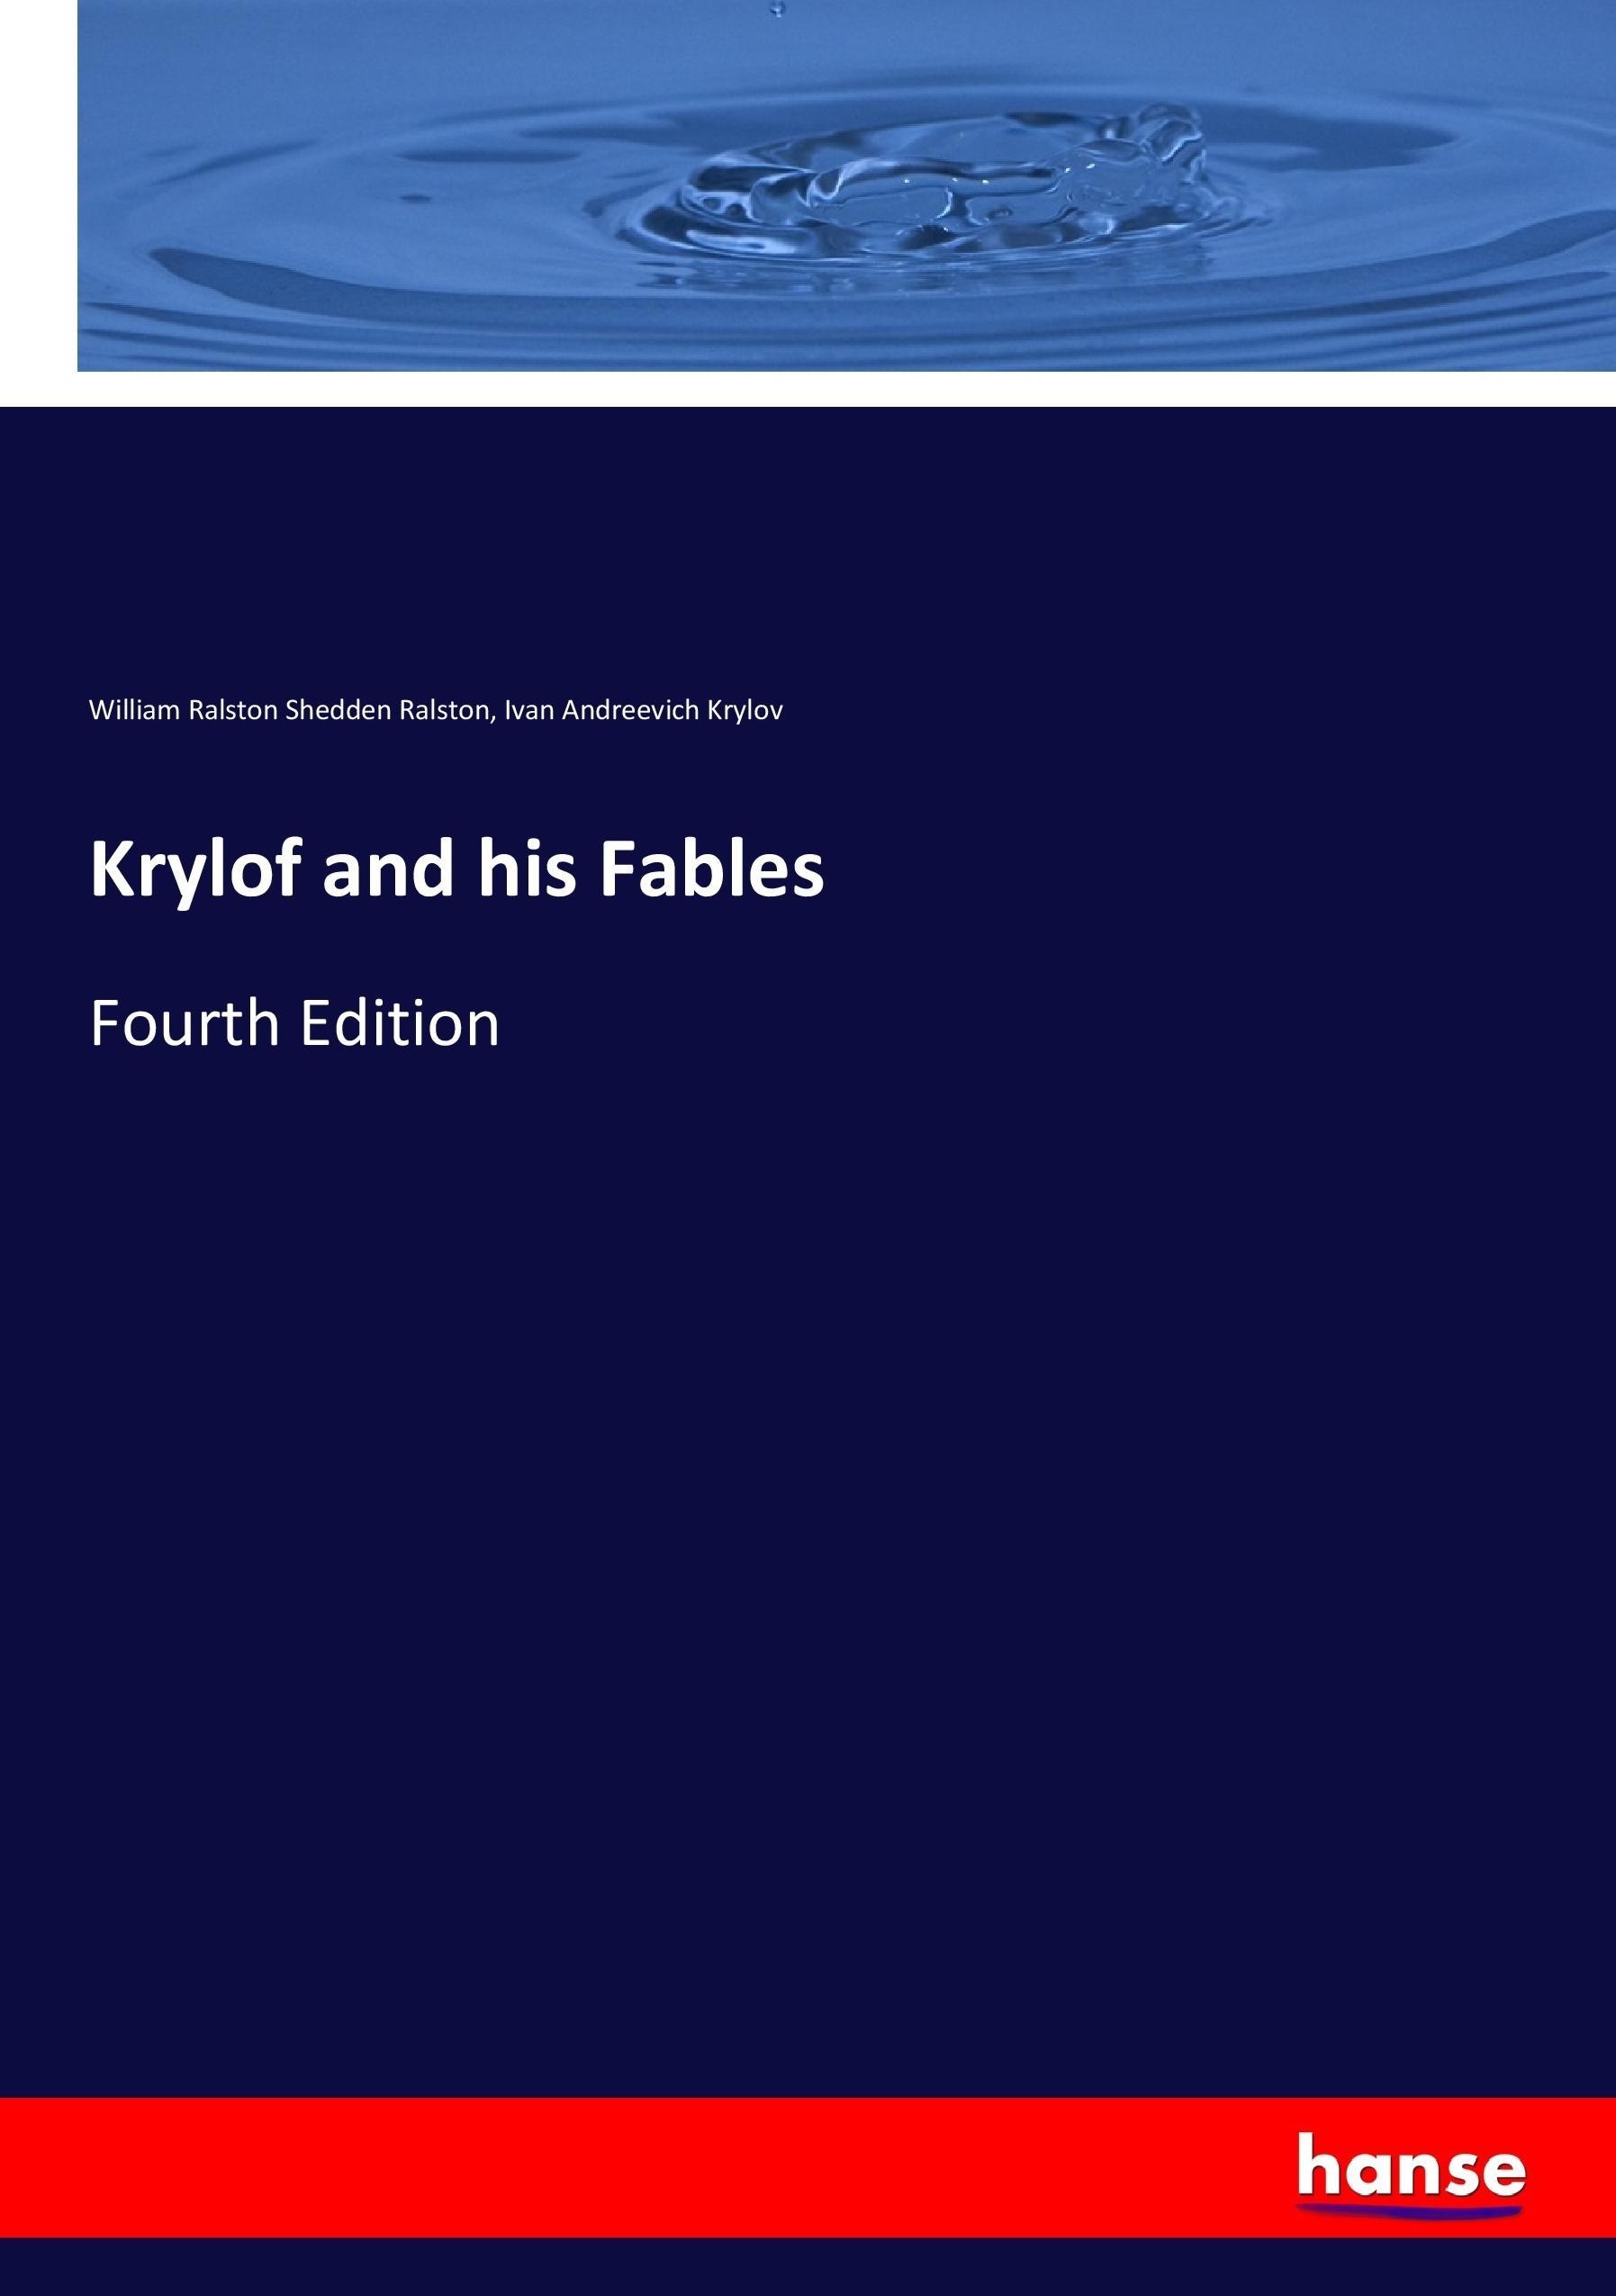 Krylof and his Fables - Ralston, William Ralston Shedden Krylov, Ivan Andreevich